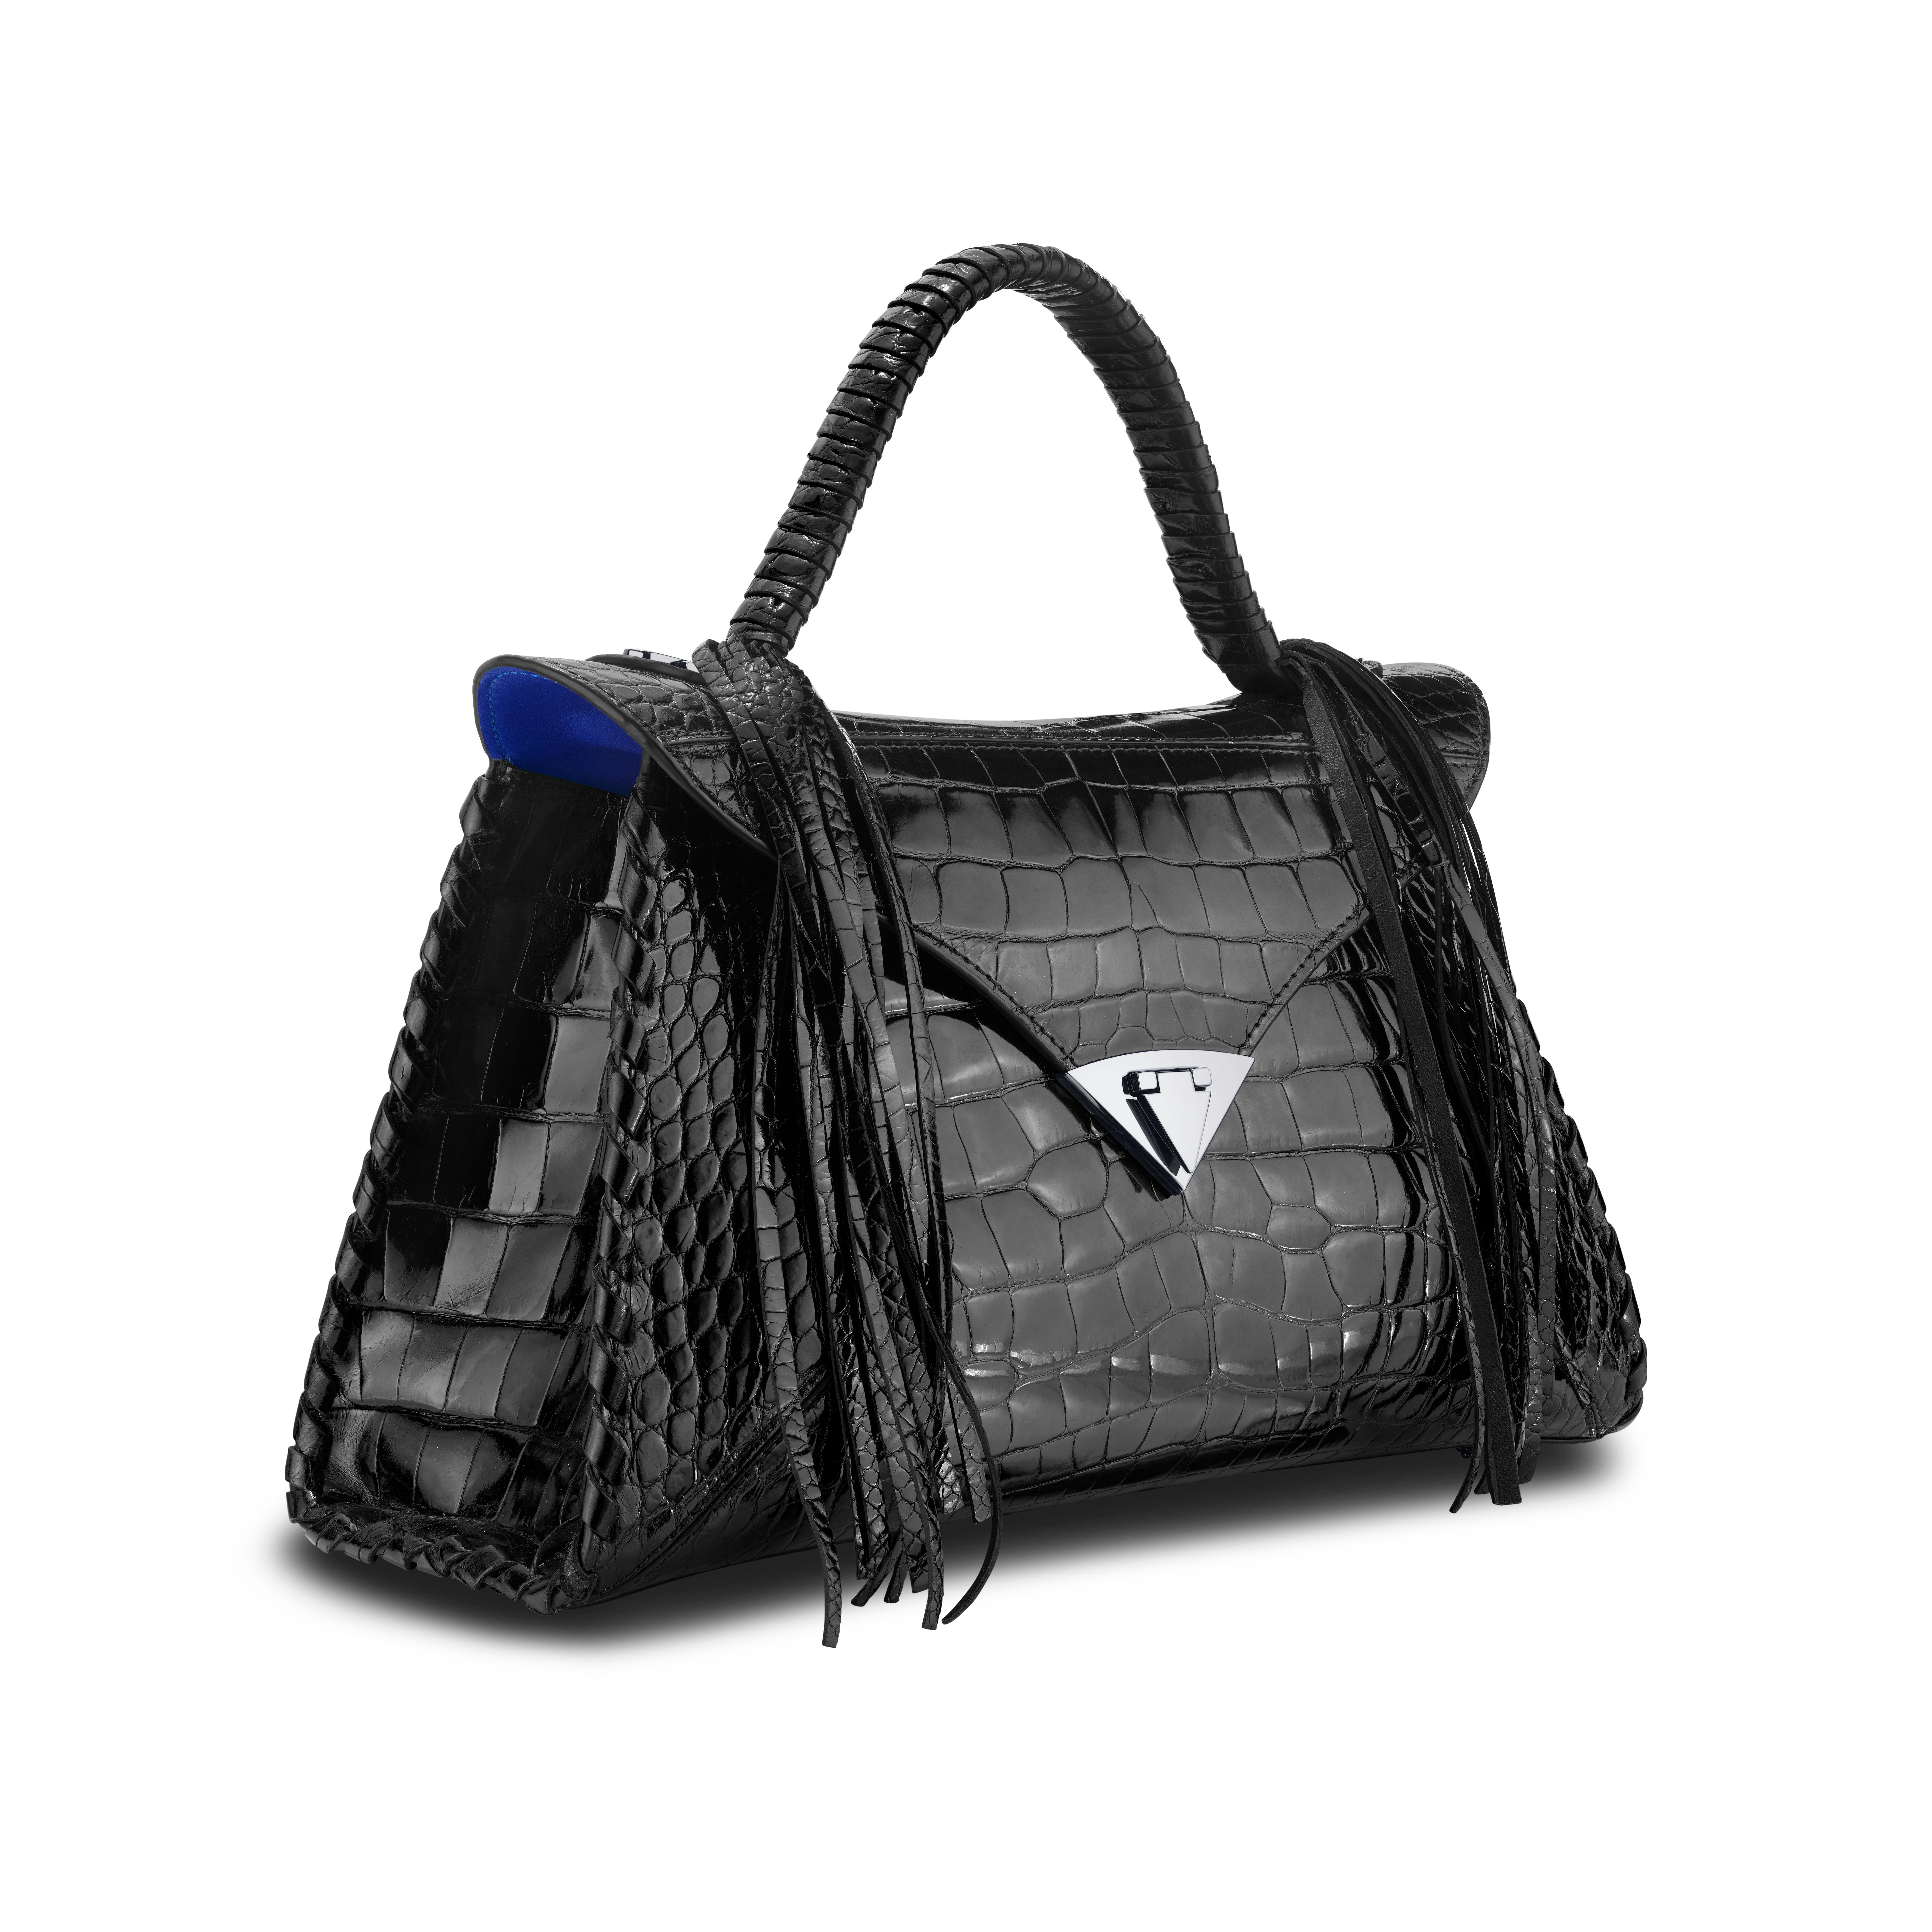 *Note this is a Made to Order Listing. Please allow 4-6 weeks for your timeless handbag to arrive.*

This extremely rare black alligator LJ Handbag is finished in a special Bombè treatment, which leaves the skin with an incredible sheen, while